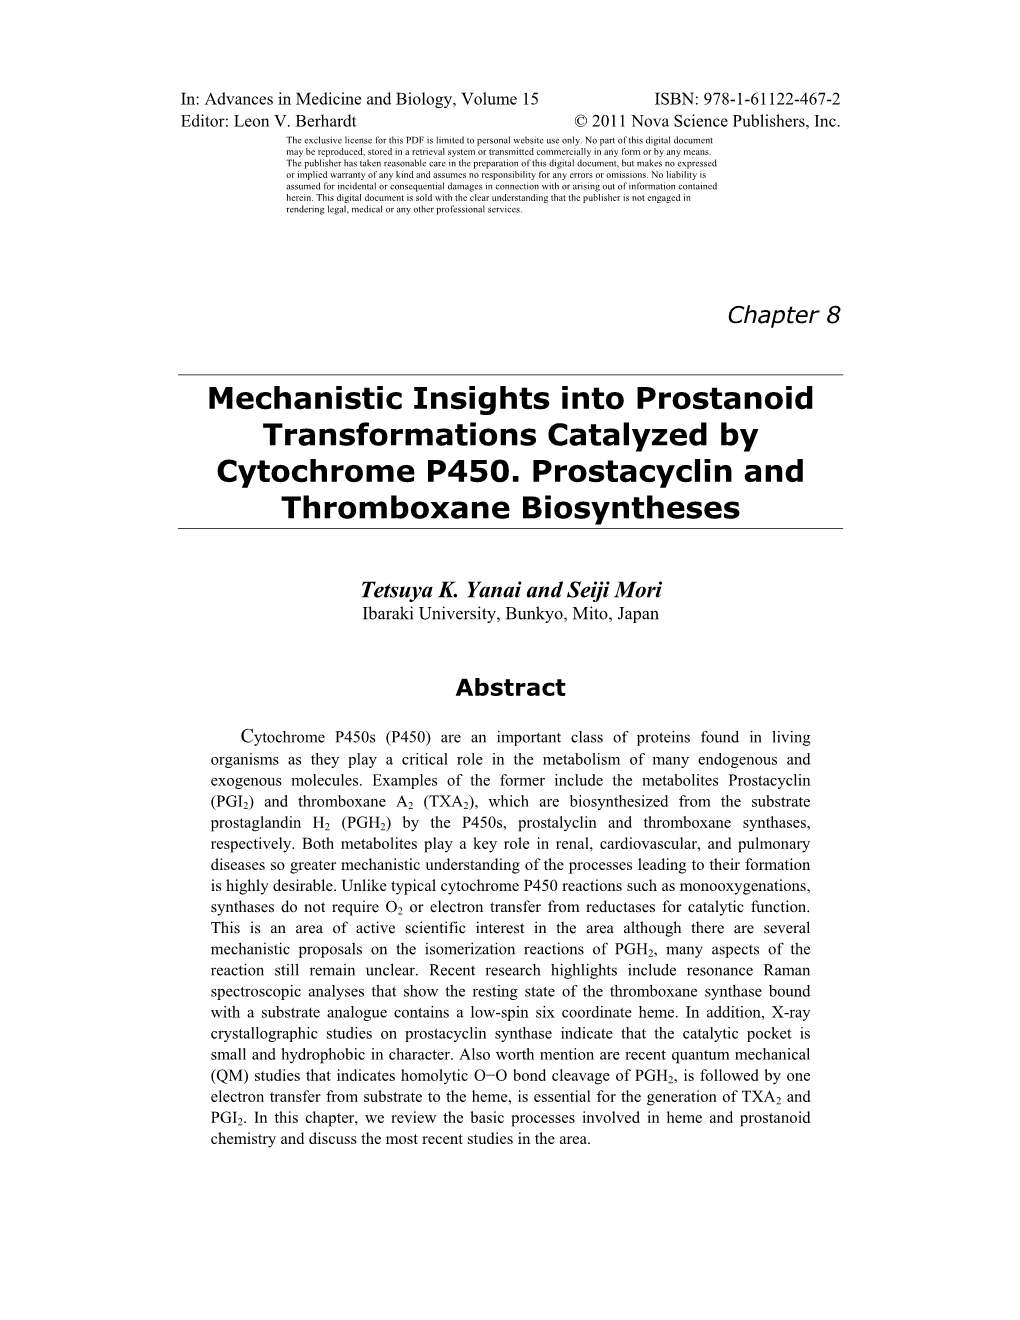 Mechanistic Insights Into Prostanoid Transformations Catalyzed by Cytochrome P450